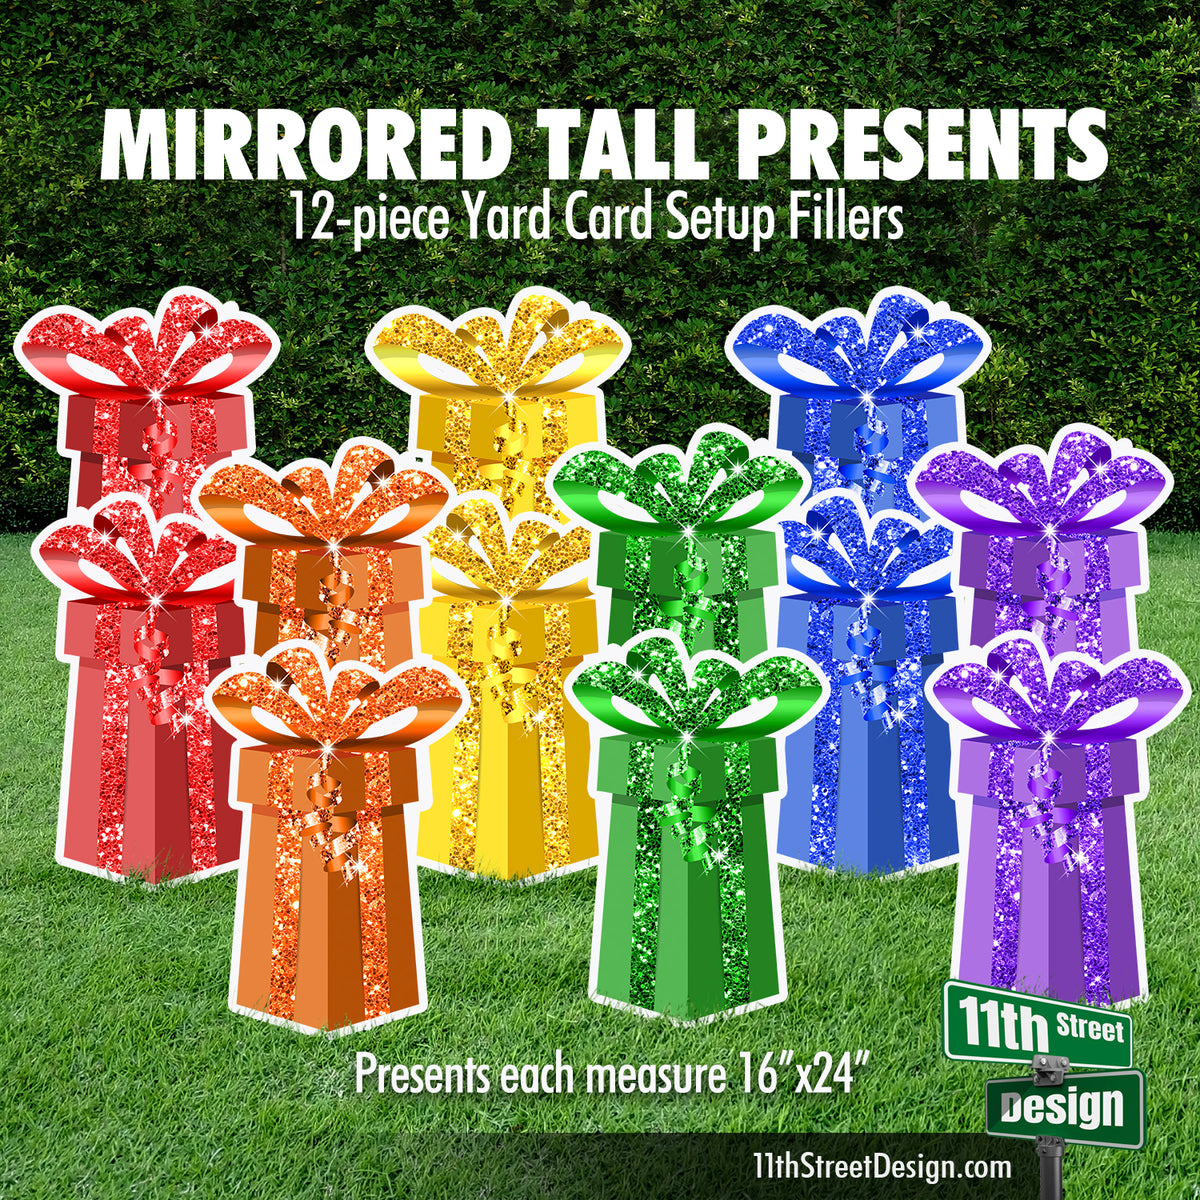 Mirrored Tall Presents - Whimsical Basic Rainbow Colors